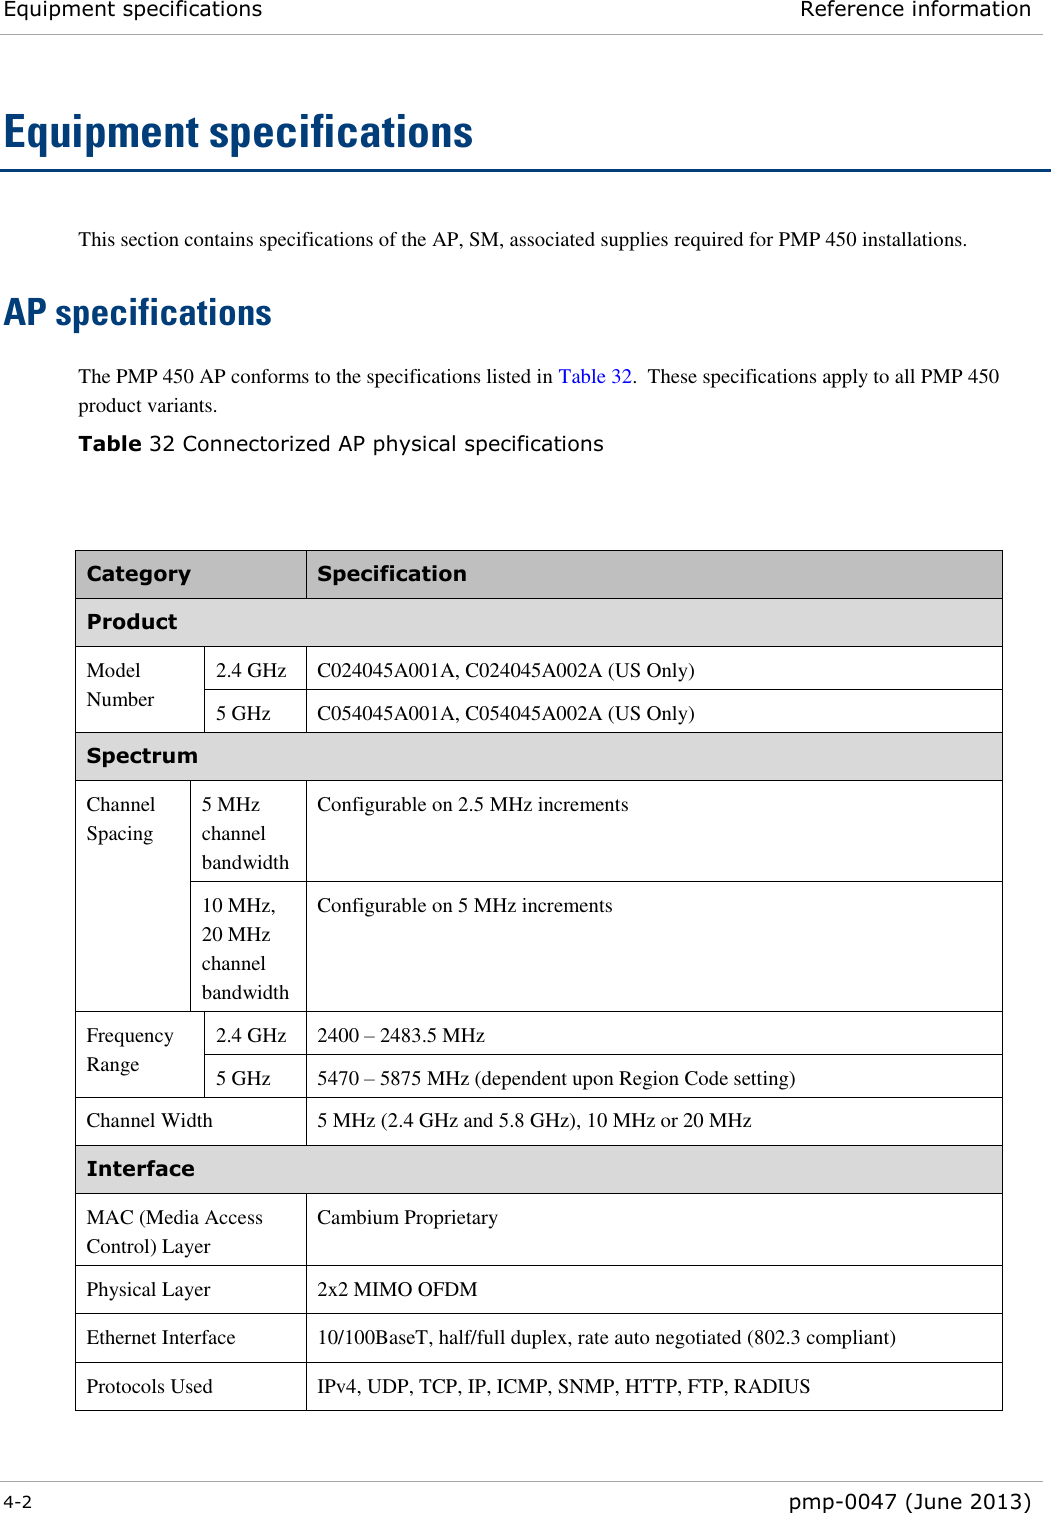 Equipment specifications Reference information  4-2  pmp-0047 (June 2013)  Equipment specifications This section contains specifications of the AP, SM, associated supplies required for PMP 450 installations. AP specifications The PMP 450 AP conforms to the specifications listed in Table 32.  These specifications apply to all PMP 450 product variants. Table 32 Connectorized AP physical specifications  Category Specification Product Model Number 2.4 GHz C024045A001A, C024045A002A (US Only) 5 GHz C054045A001A, C054045A002A (US Only) Spectrum Channel Spacing 5 MHz channel bandwidth Configurable on 2.5 MHz increments 10 MHz, 20 MHz channel bandwidth Configurable on 5 MHz increments Frequency Range 2.4 GHz 2400 – 2483.5 MHz 5 GHz 5470 – 5875 MHz (dependent upon Region Code setting) Channel Width 5 MHz (2.4 GHz and 5.8 GHz), 10 MHz or 20 MHz Interface MAC (Media Access Control) Layer Cambium Proprietary Physical Layer 2x2 MIMO OFDM Ethernet Interface 10/100BaseT, half/full duplex, rate auto negotiated (802.3 compliant) Protocols Used IPv4, UDP, TCP, IP, ICMP, SNMP, HTTP, FTP, RADIUS 